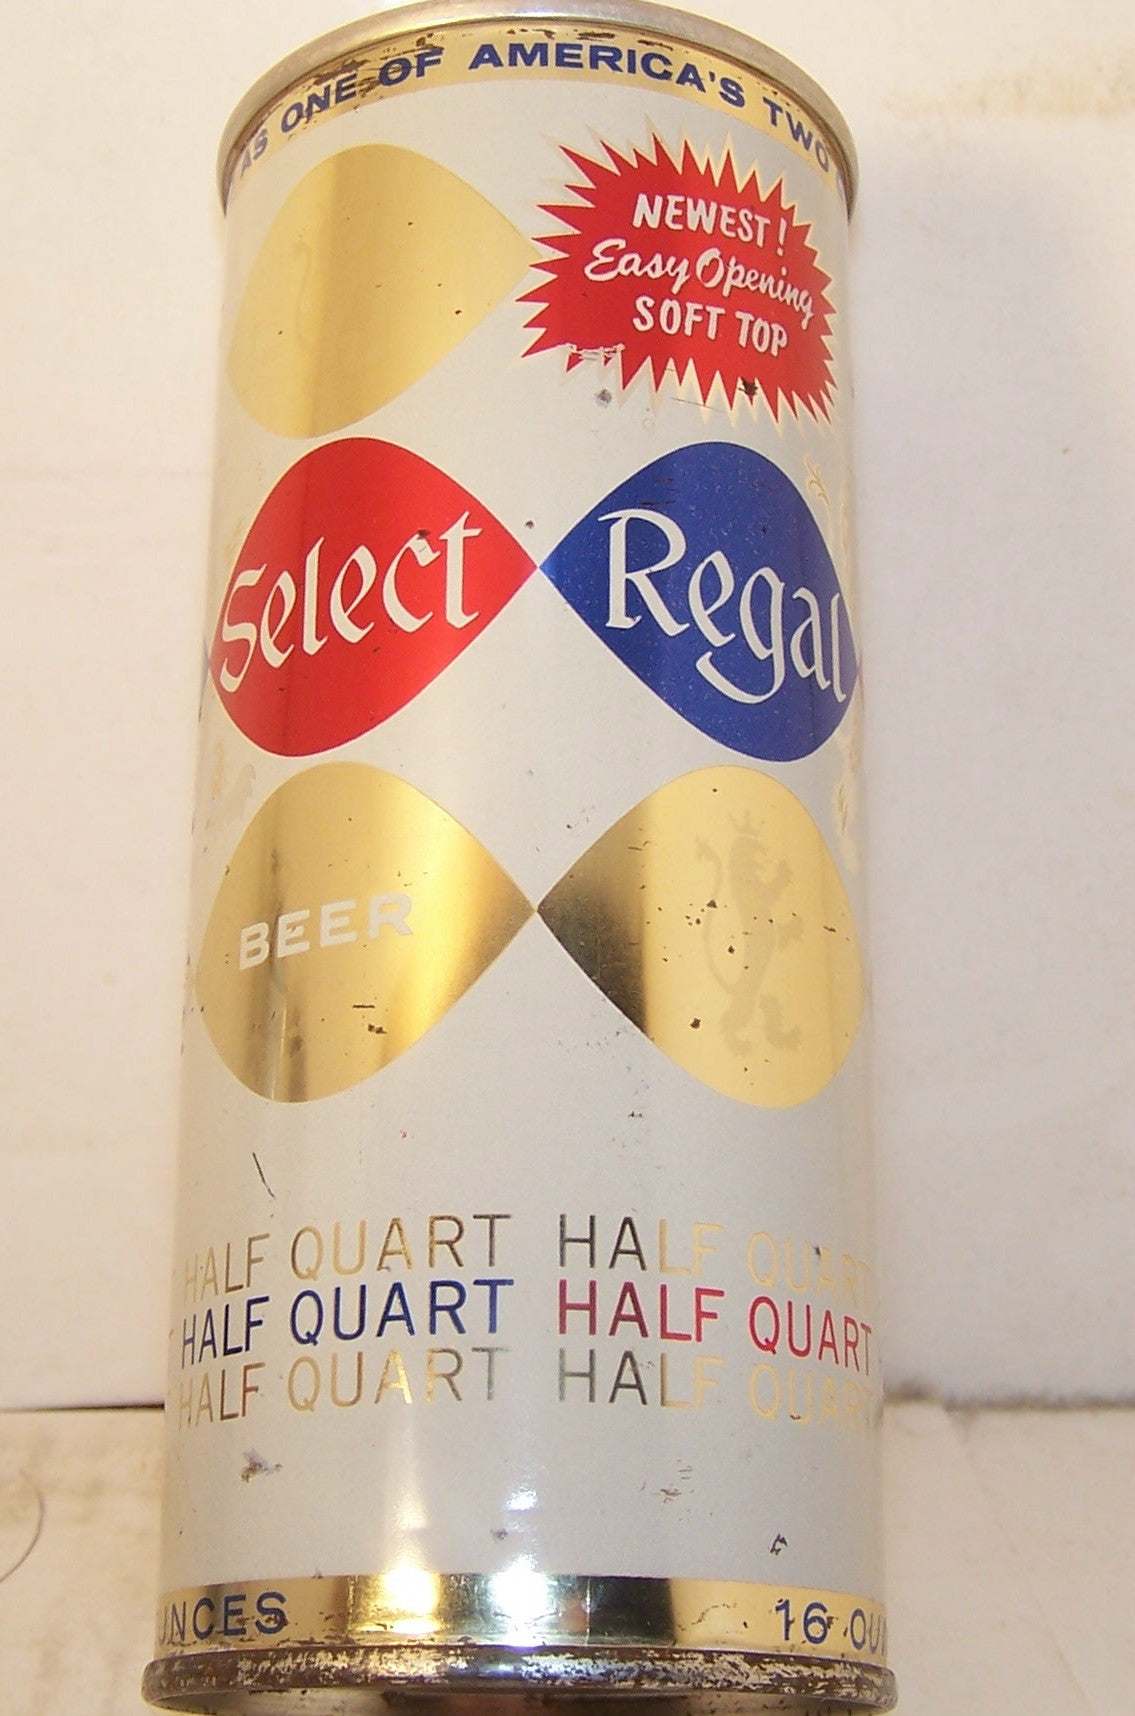 Regal Select Beer, Newest Easy Opening Soft Top, USBC 234-24, Grade 1/ 1- Sold on 2/11/15